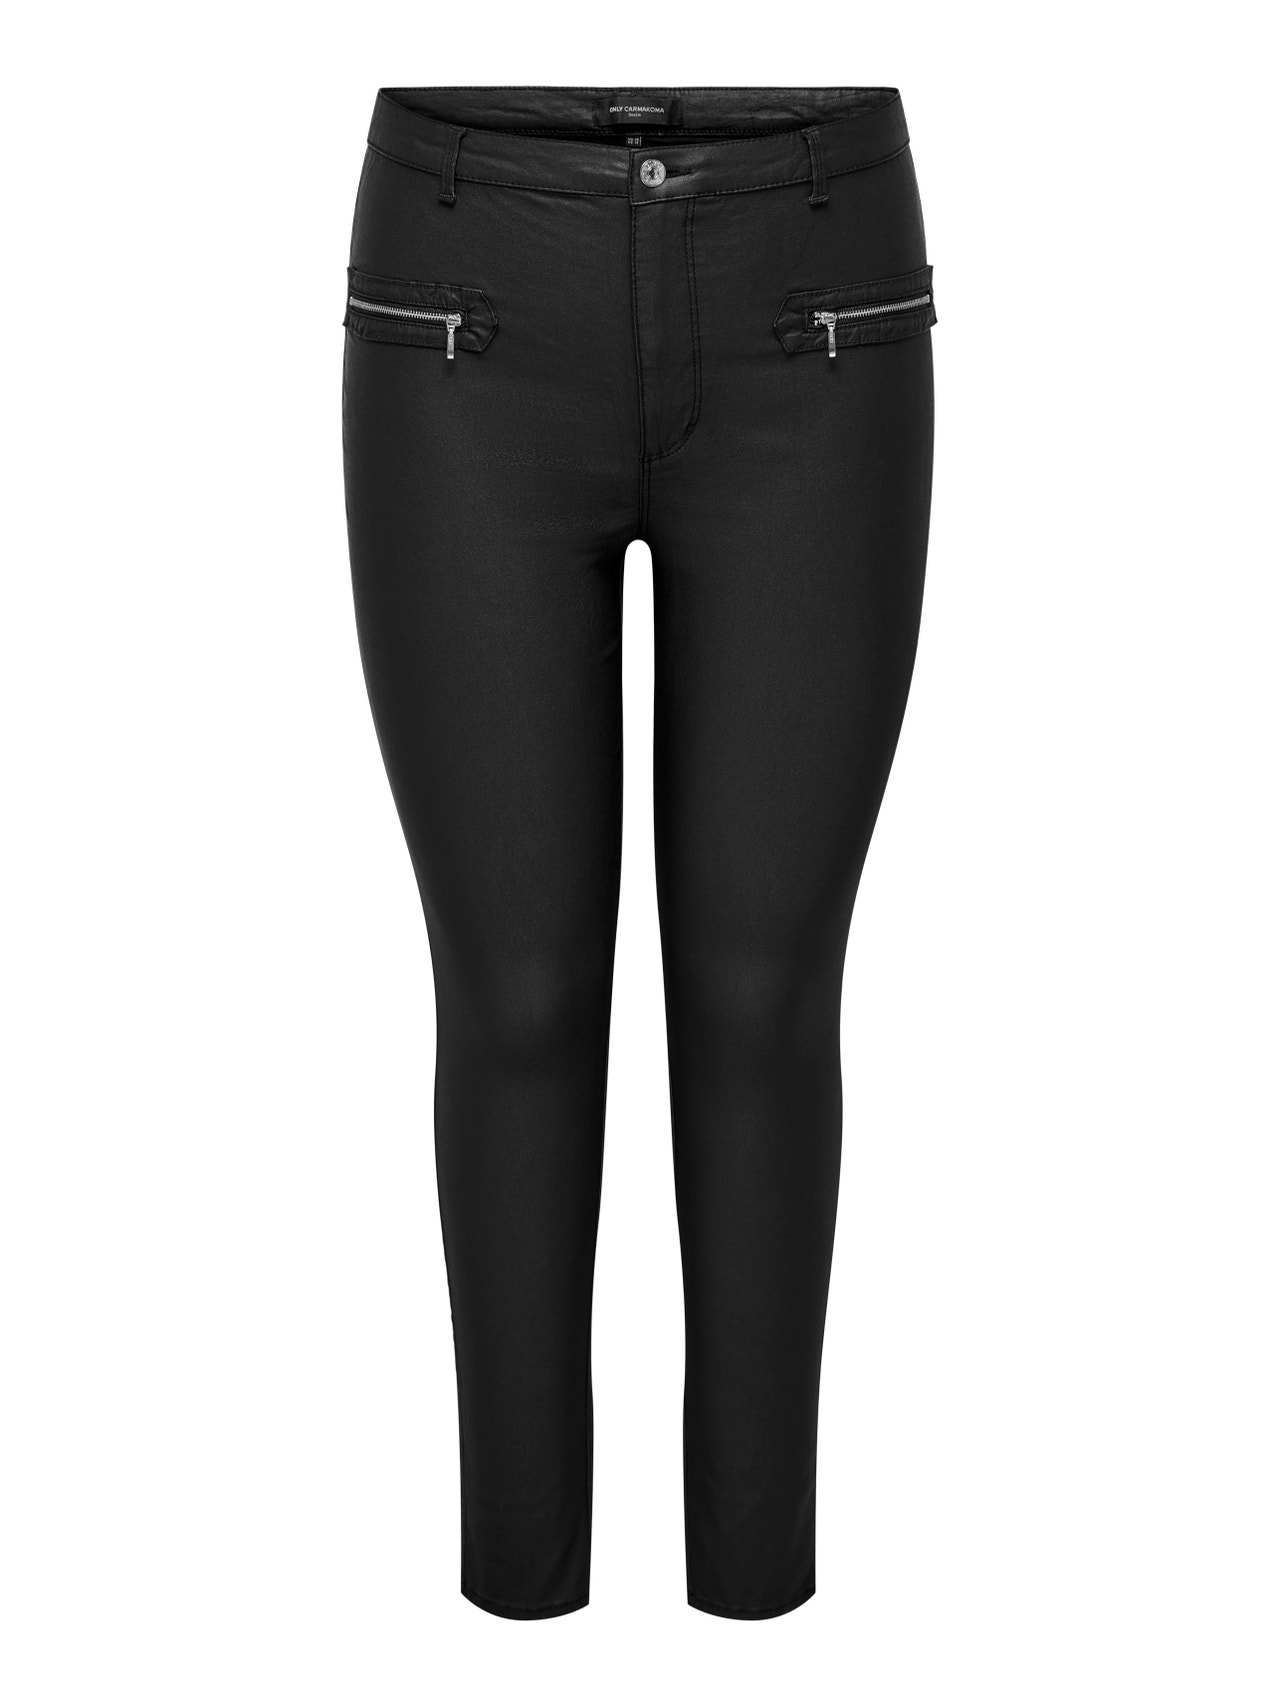 ONLY Curvy Highwaisted Trousers -Black - 15276246